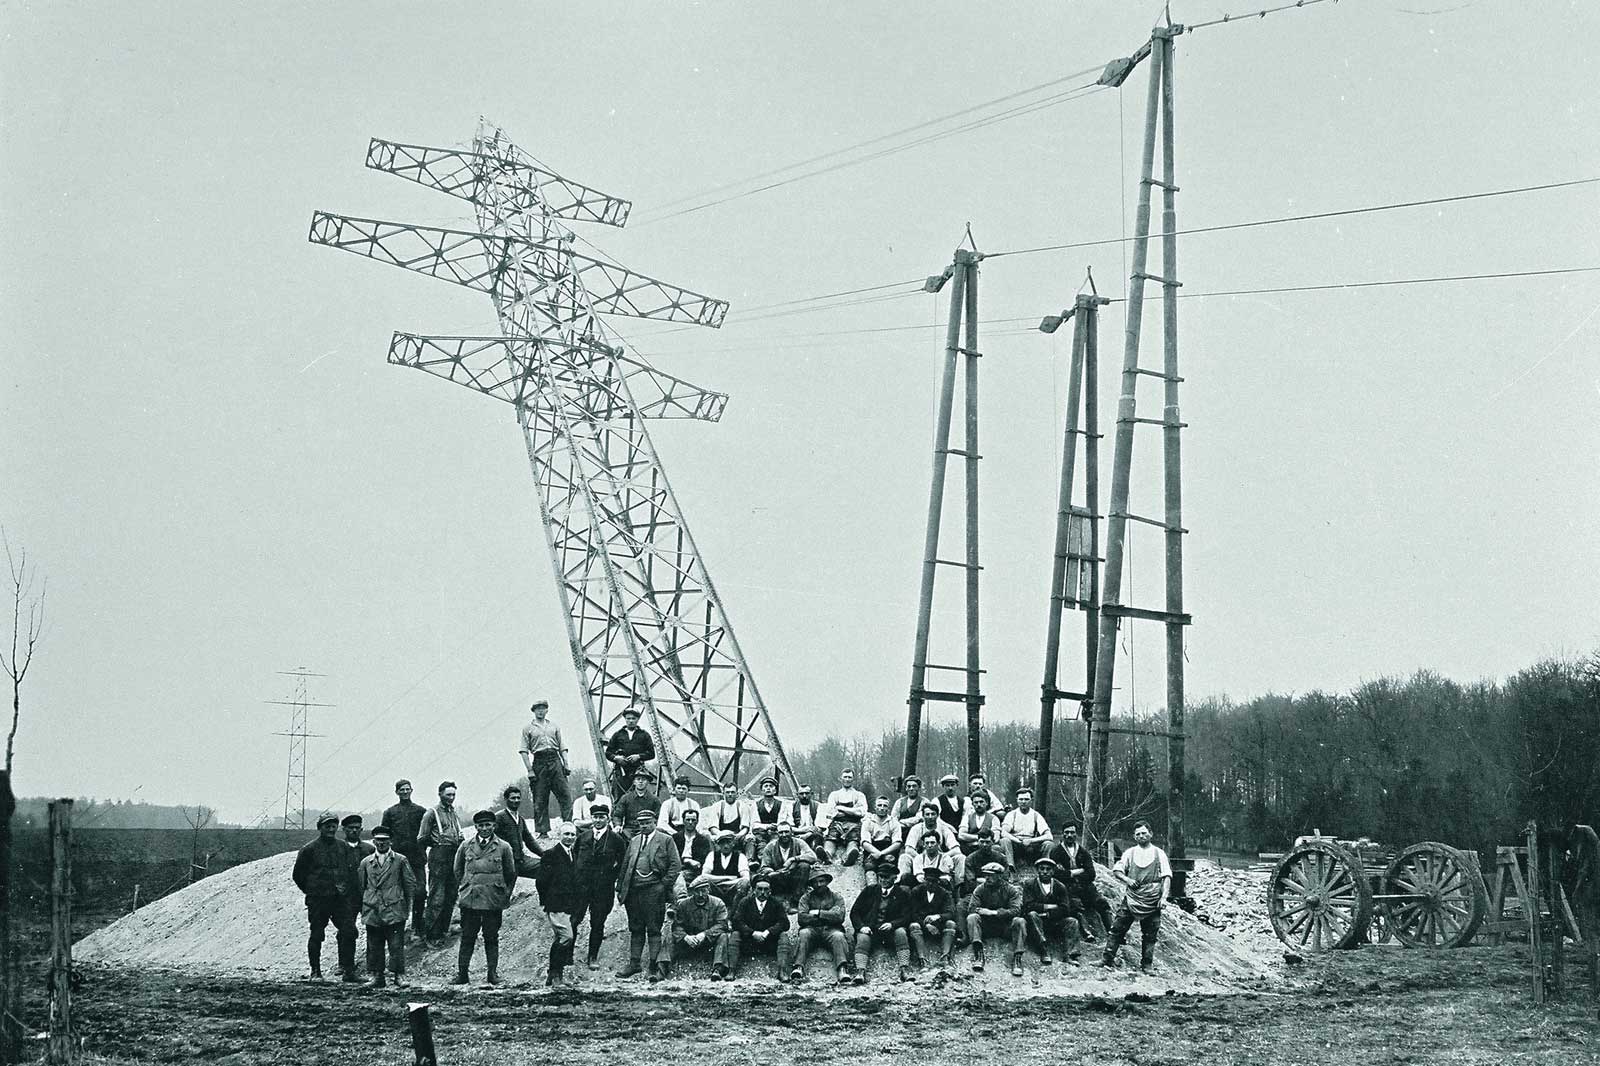 Construction of the North-South Powerline, around 1928